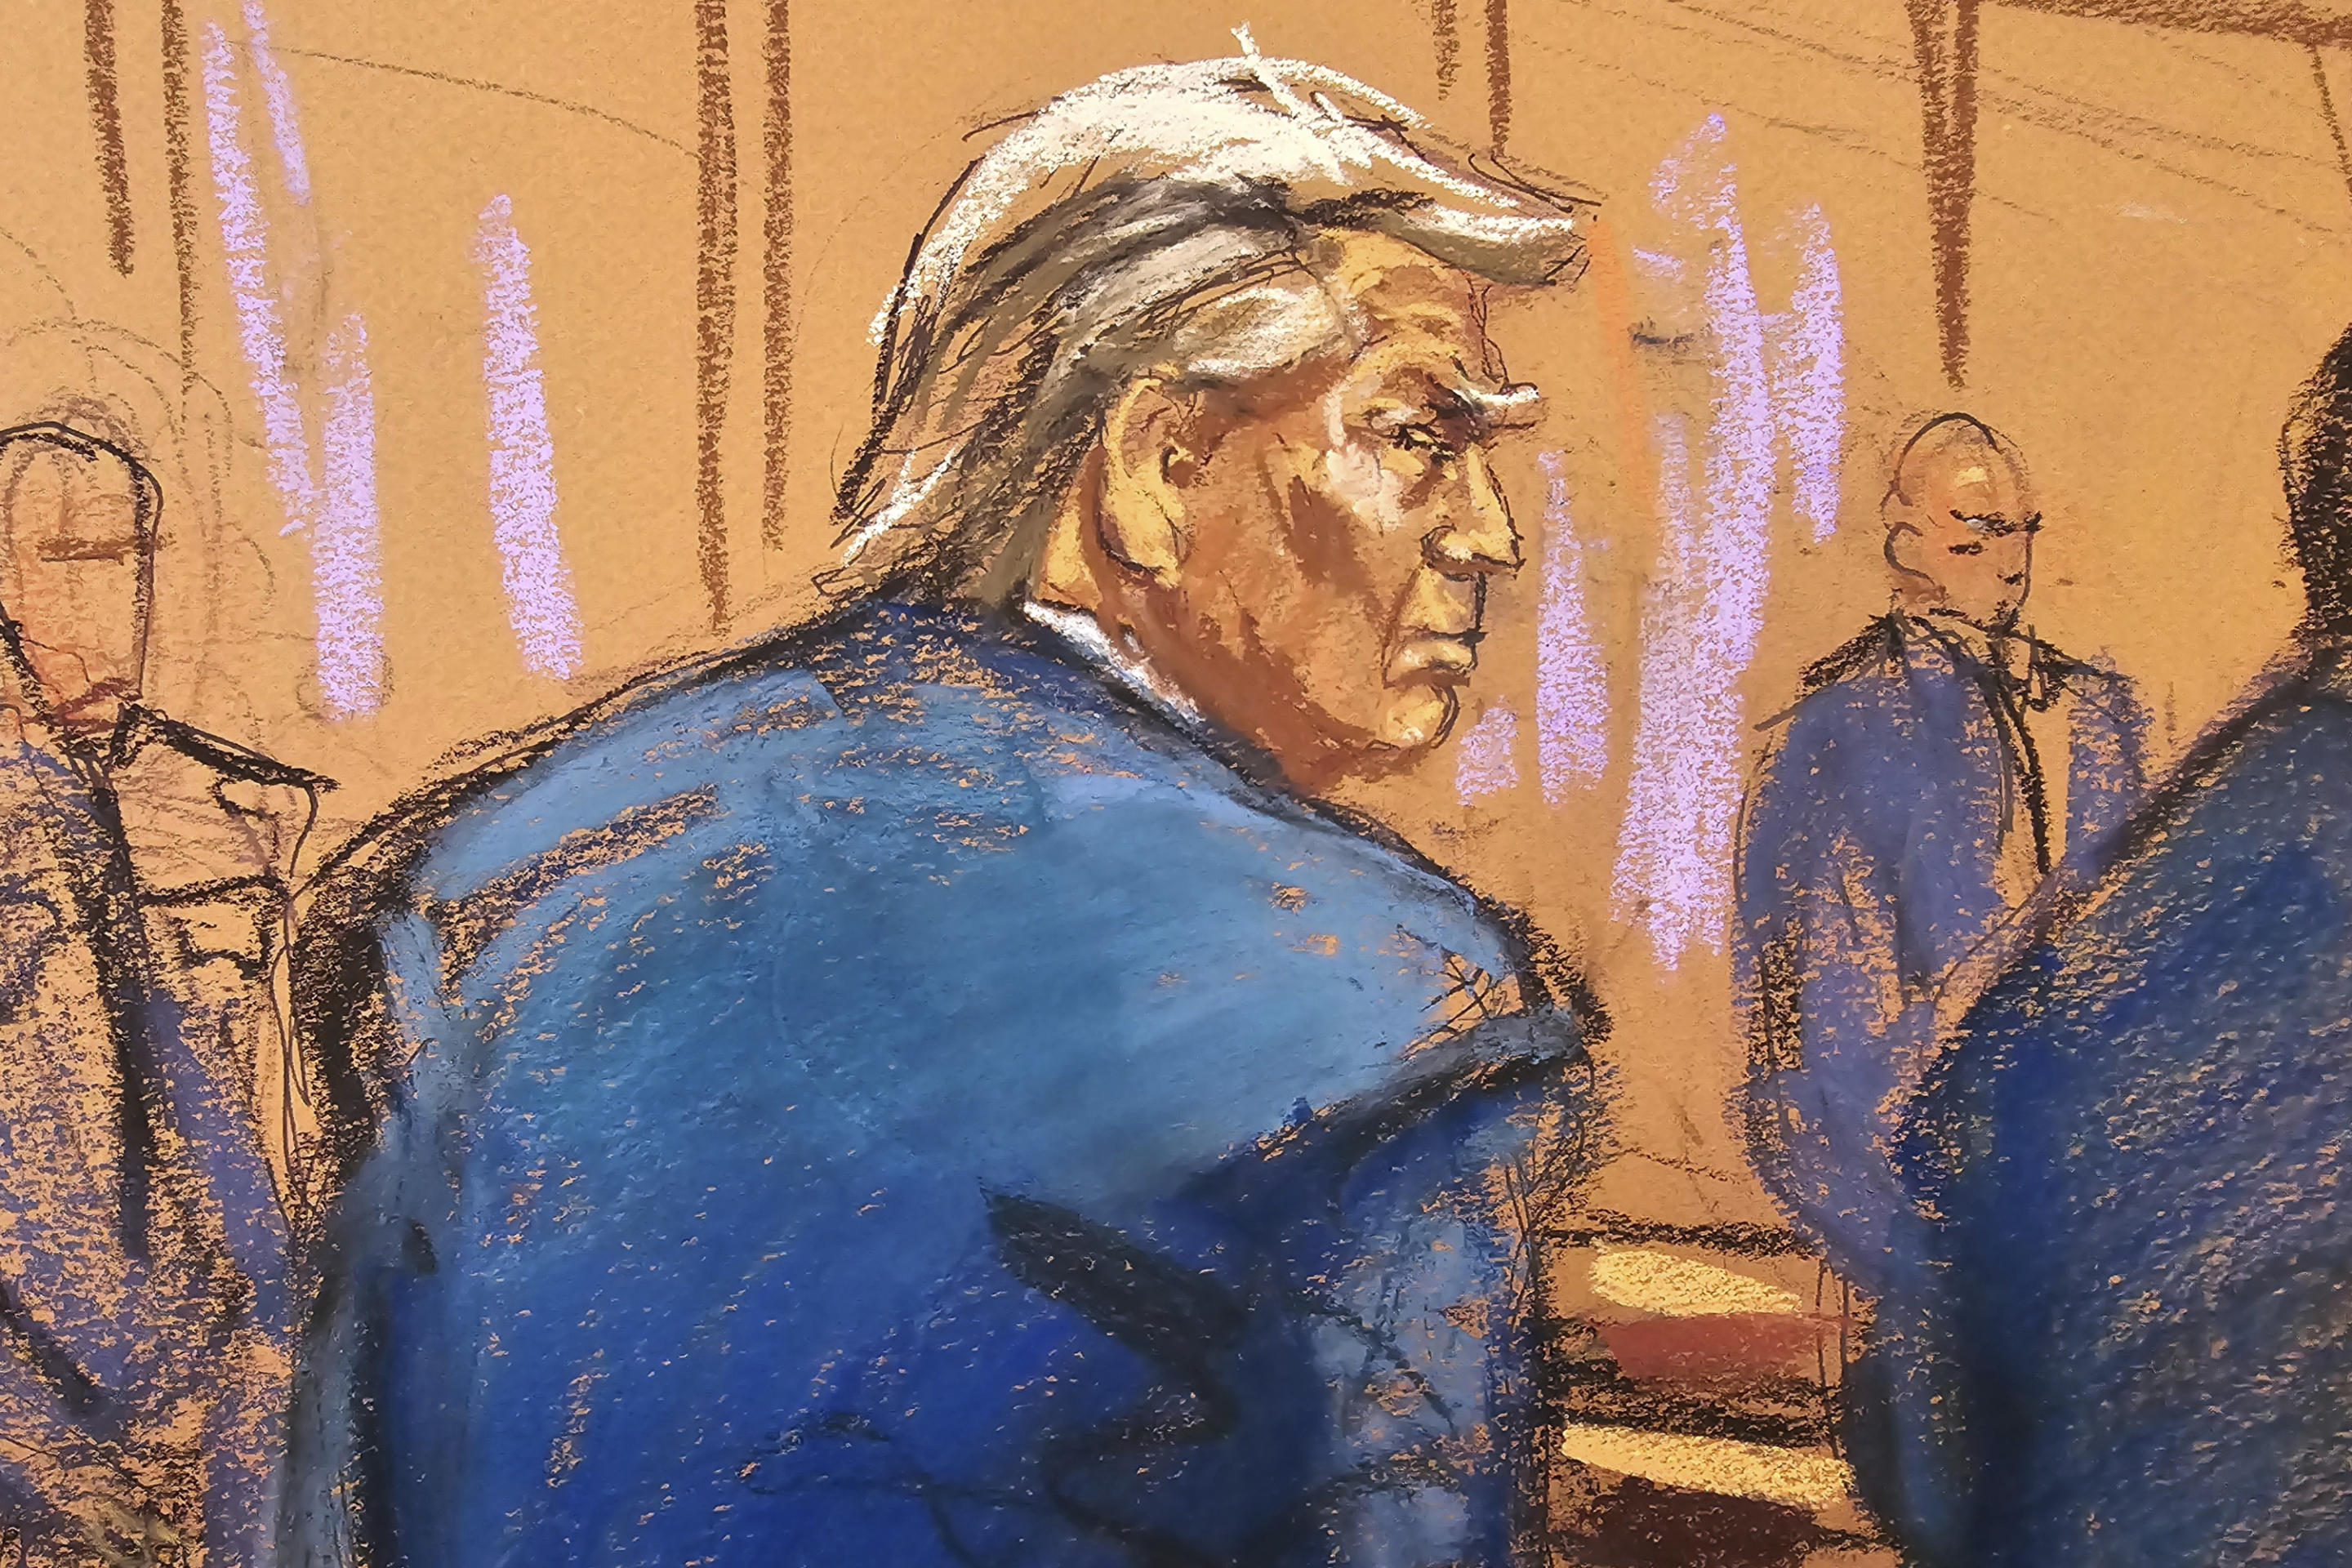 Trump enters the courtroom.